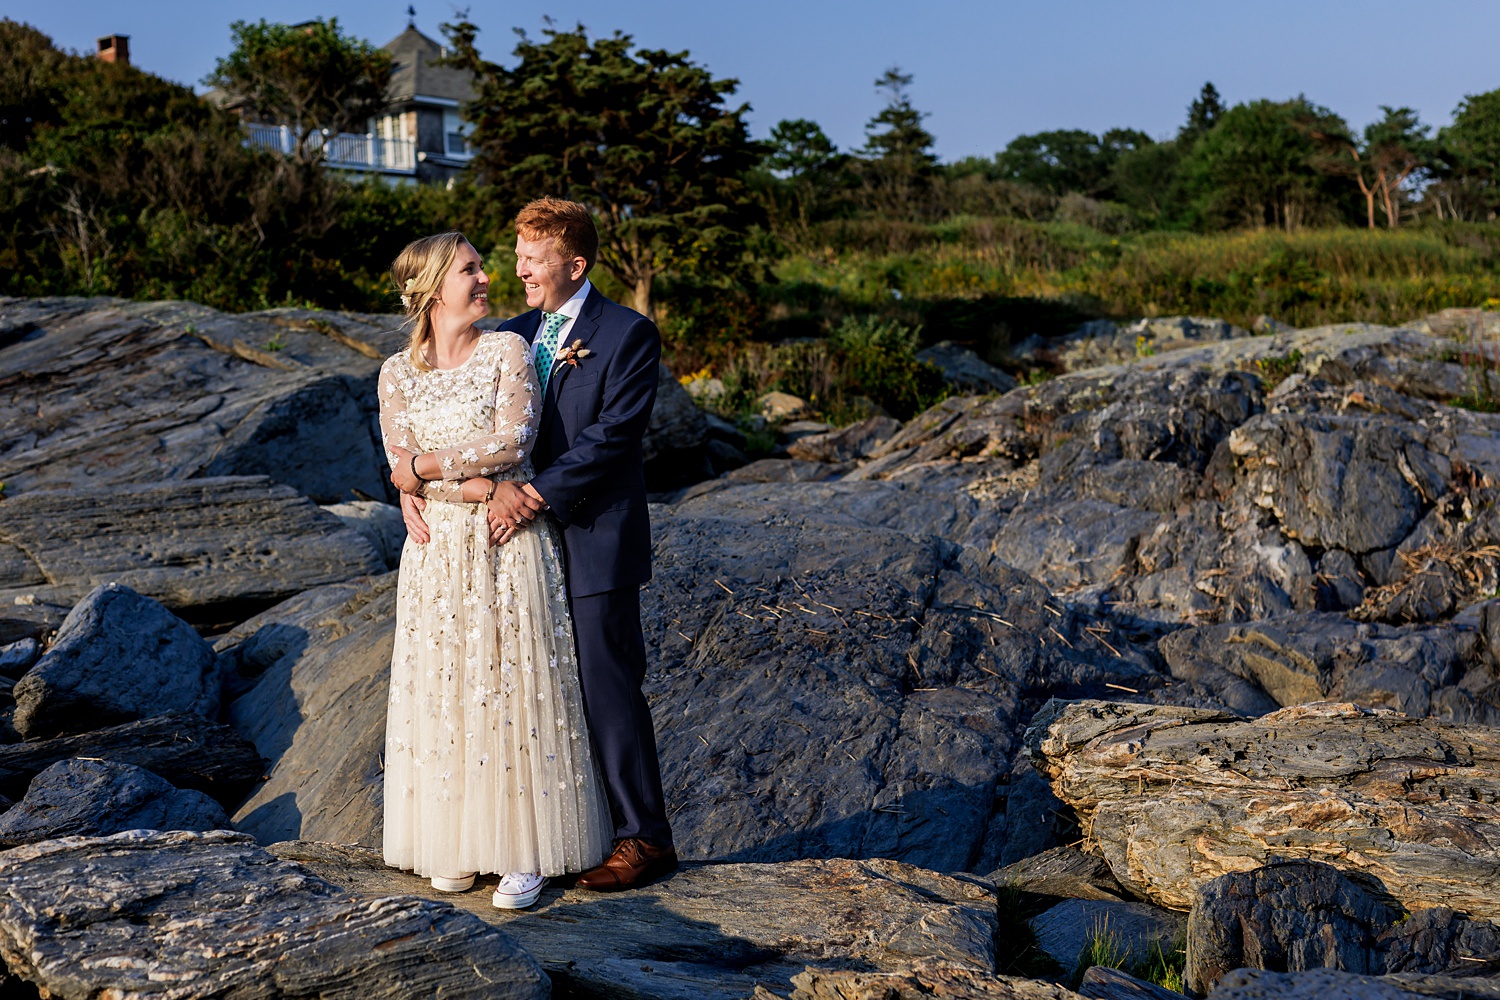 Husband and wife share a moment on the rocky cliff walk in Maine